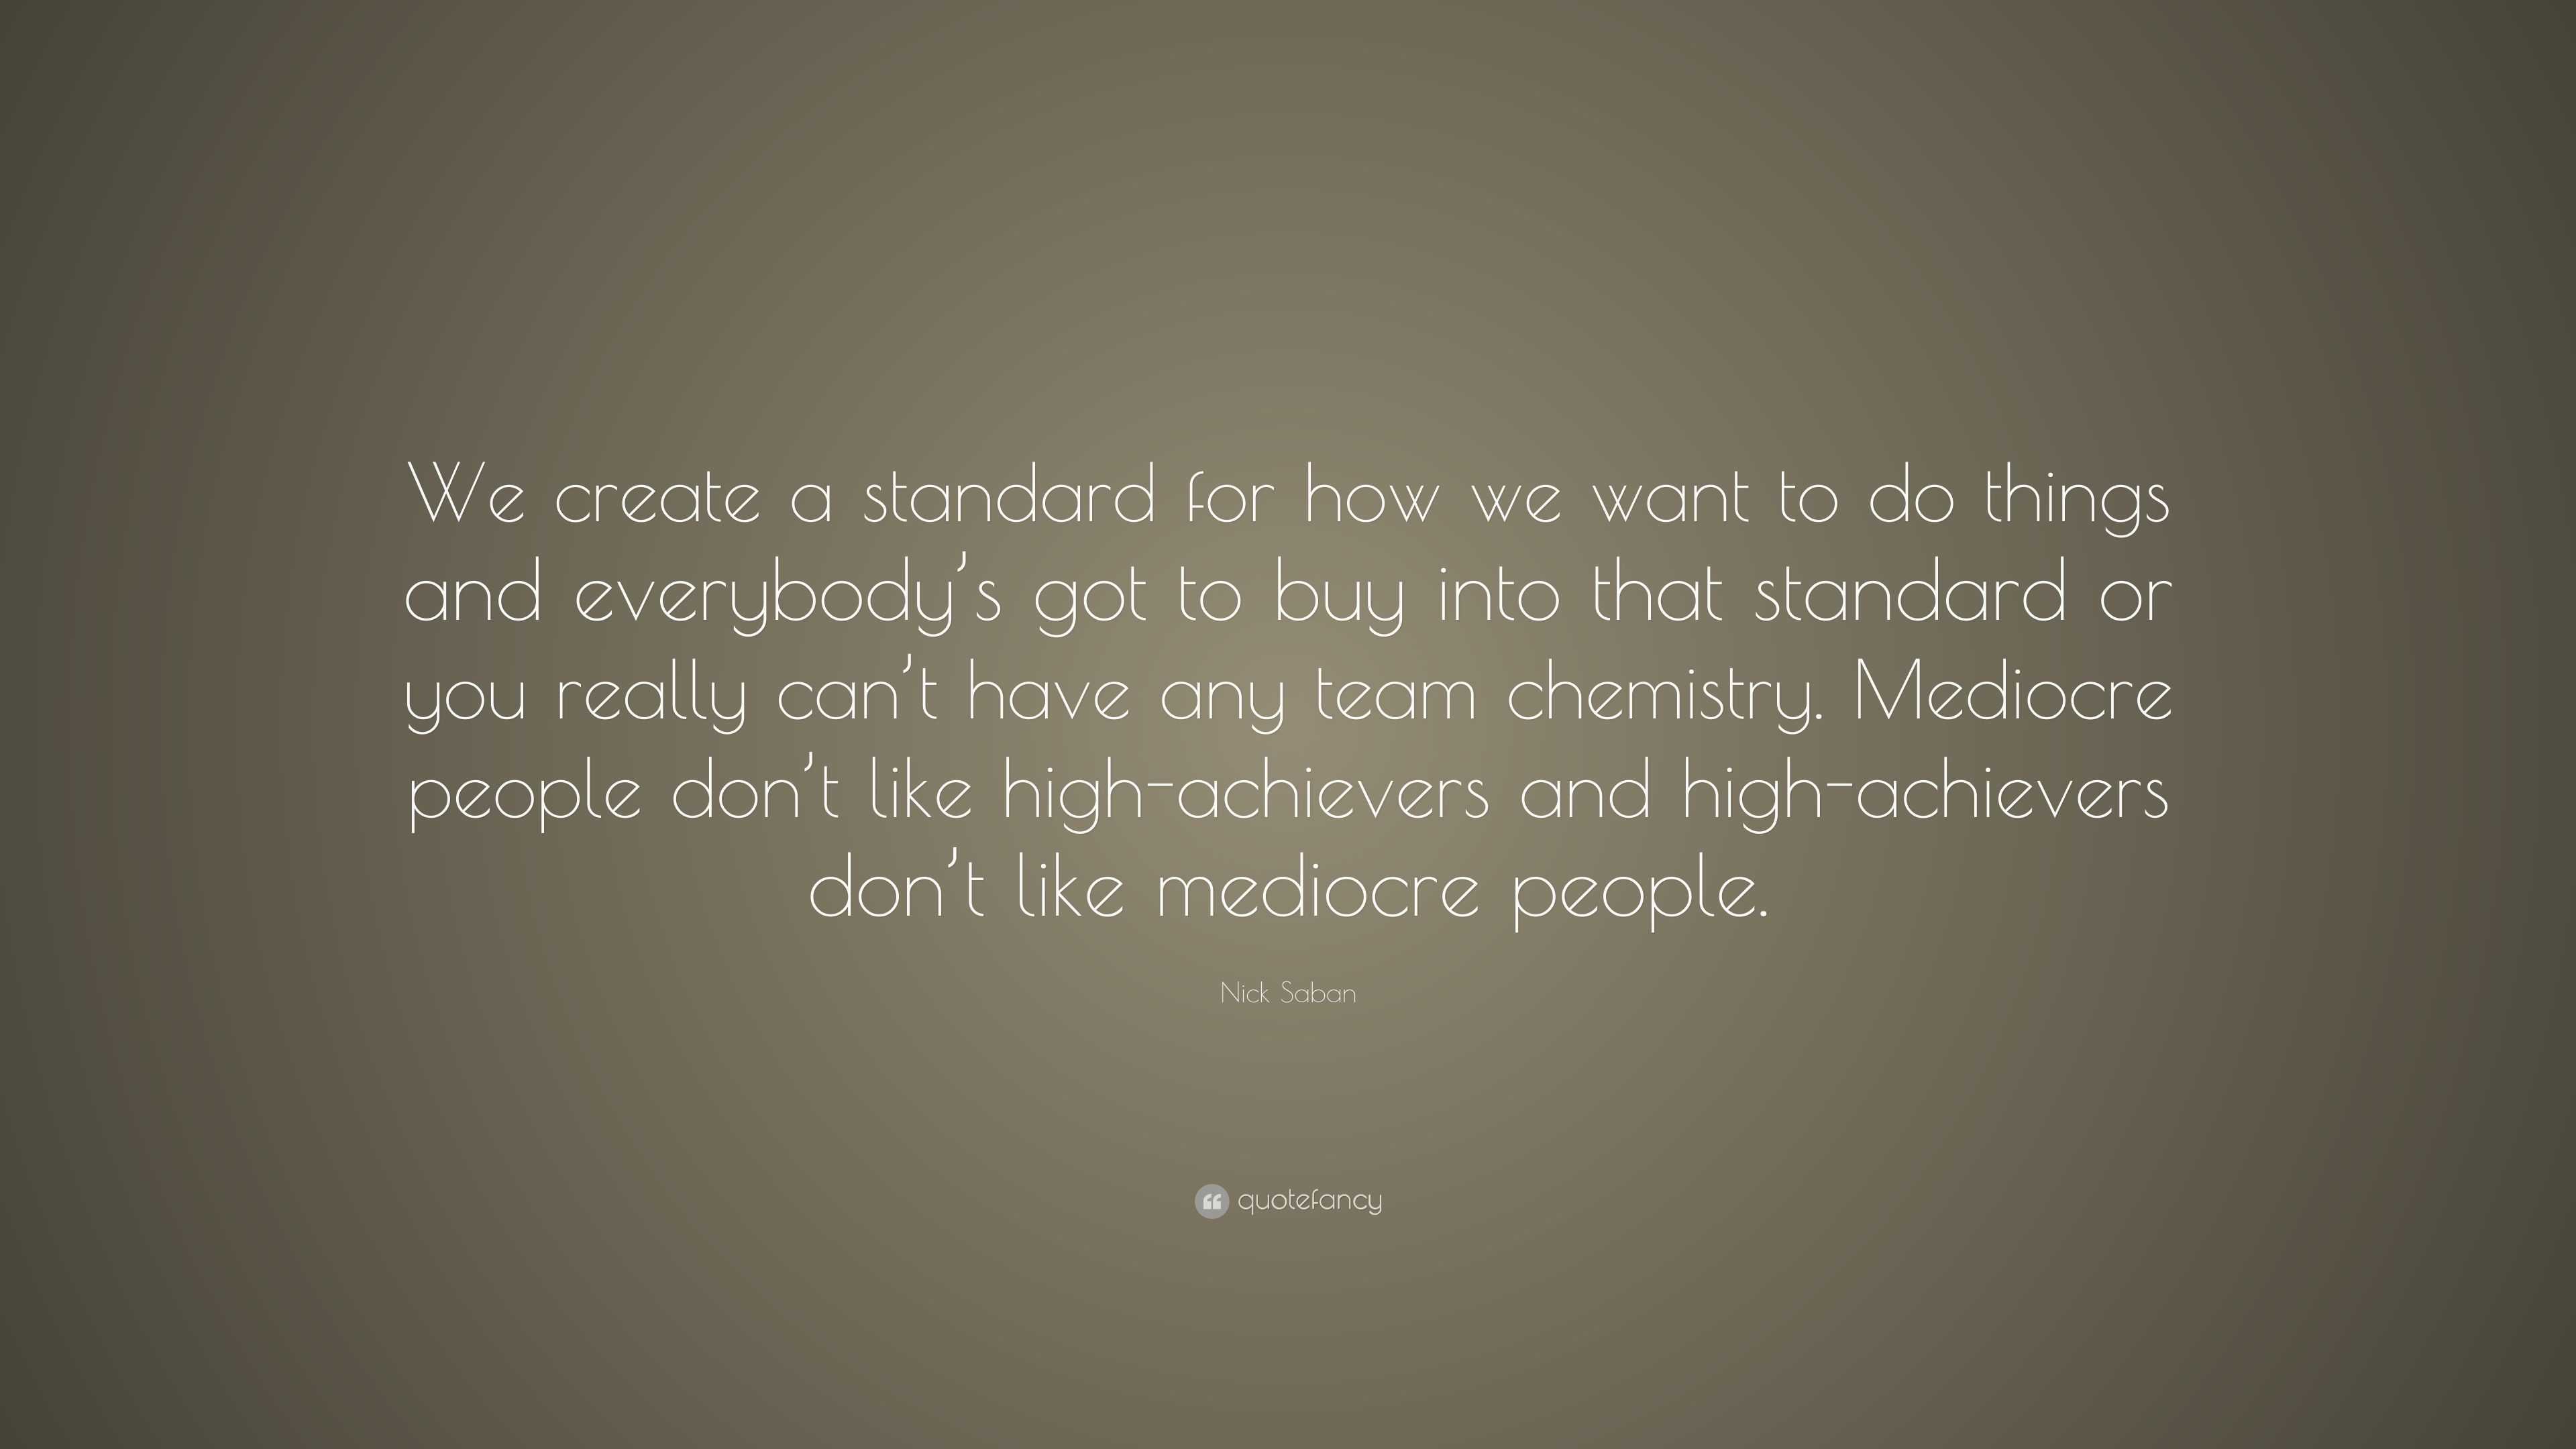 Nick Saban Quote: “We create a standard for how we want to do things ...